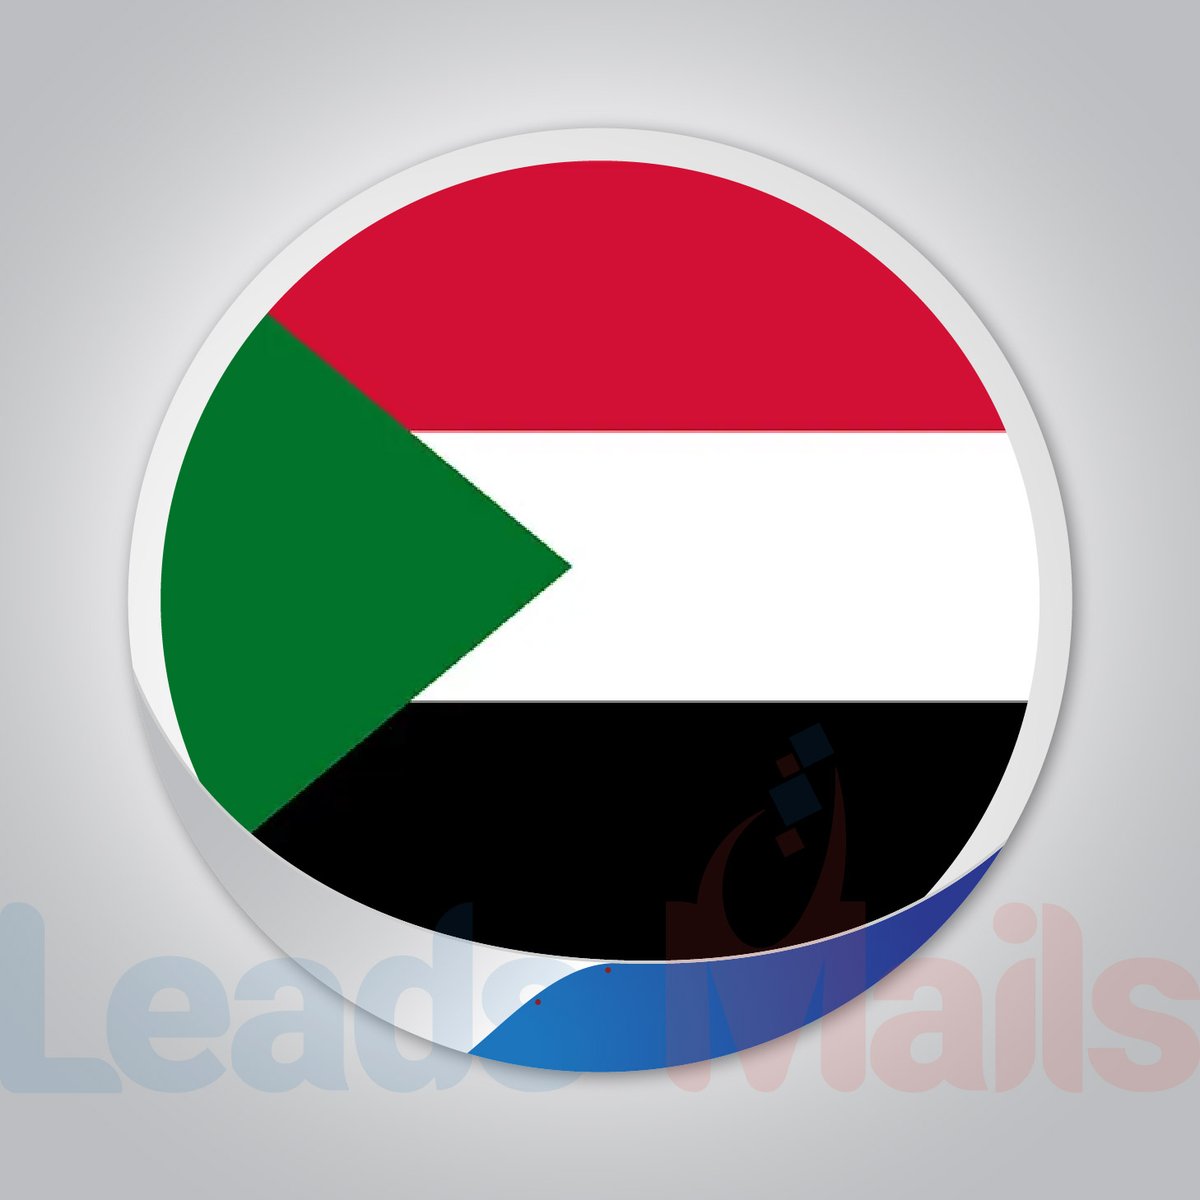 Sudan Forex Traders Email List, Sales Leads Database
leadsmails.com/sudan-forex-tr…
#forextraders #sudan #forex #email #emailist #leads #database #trading